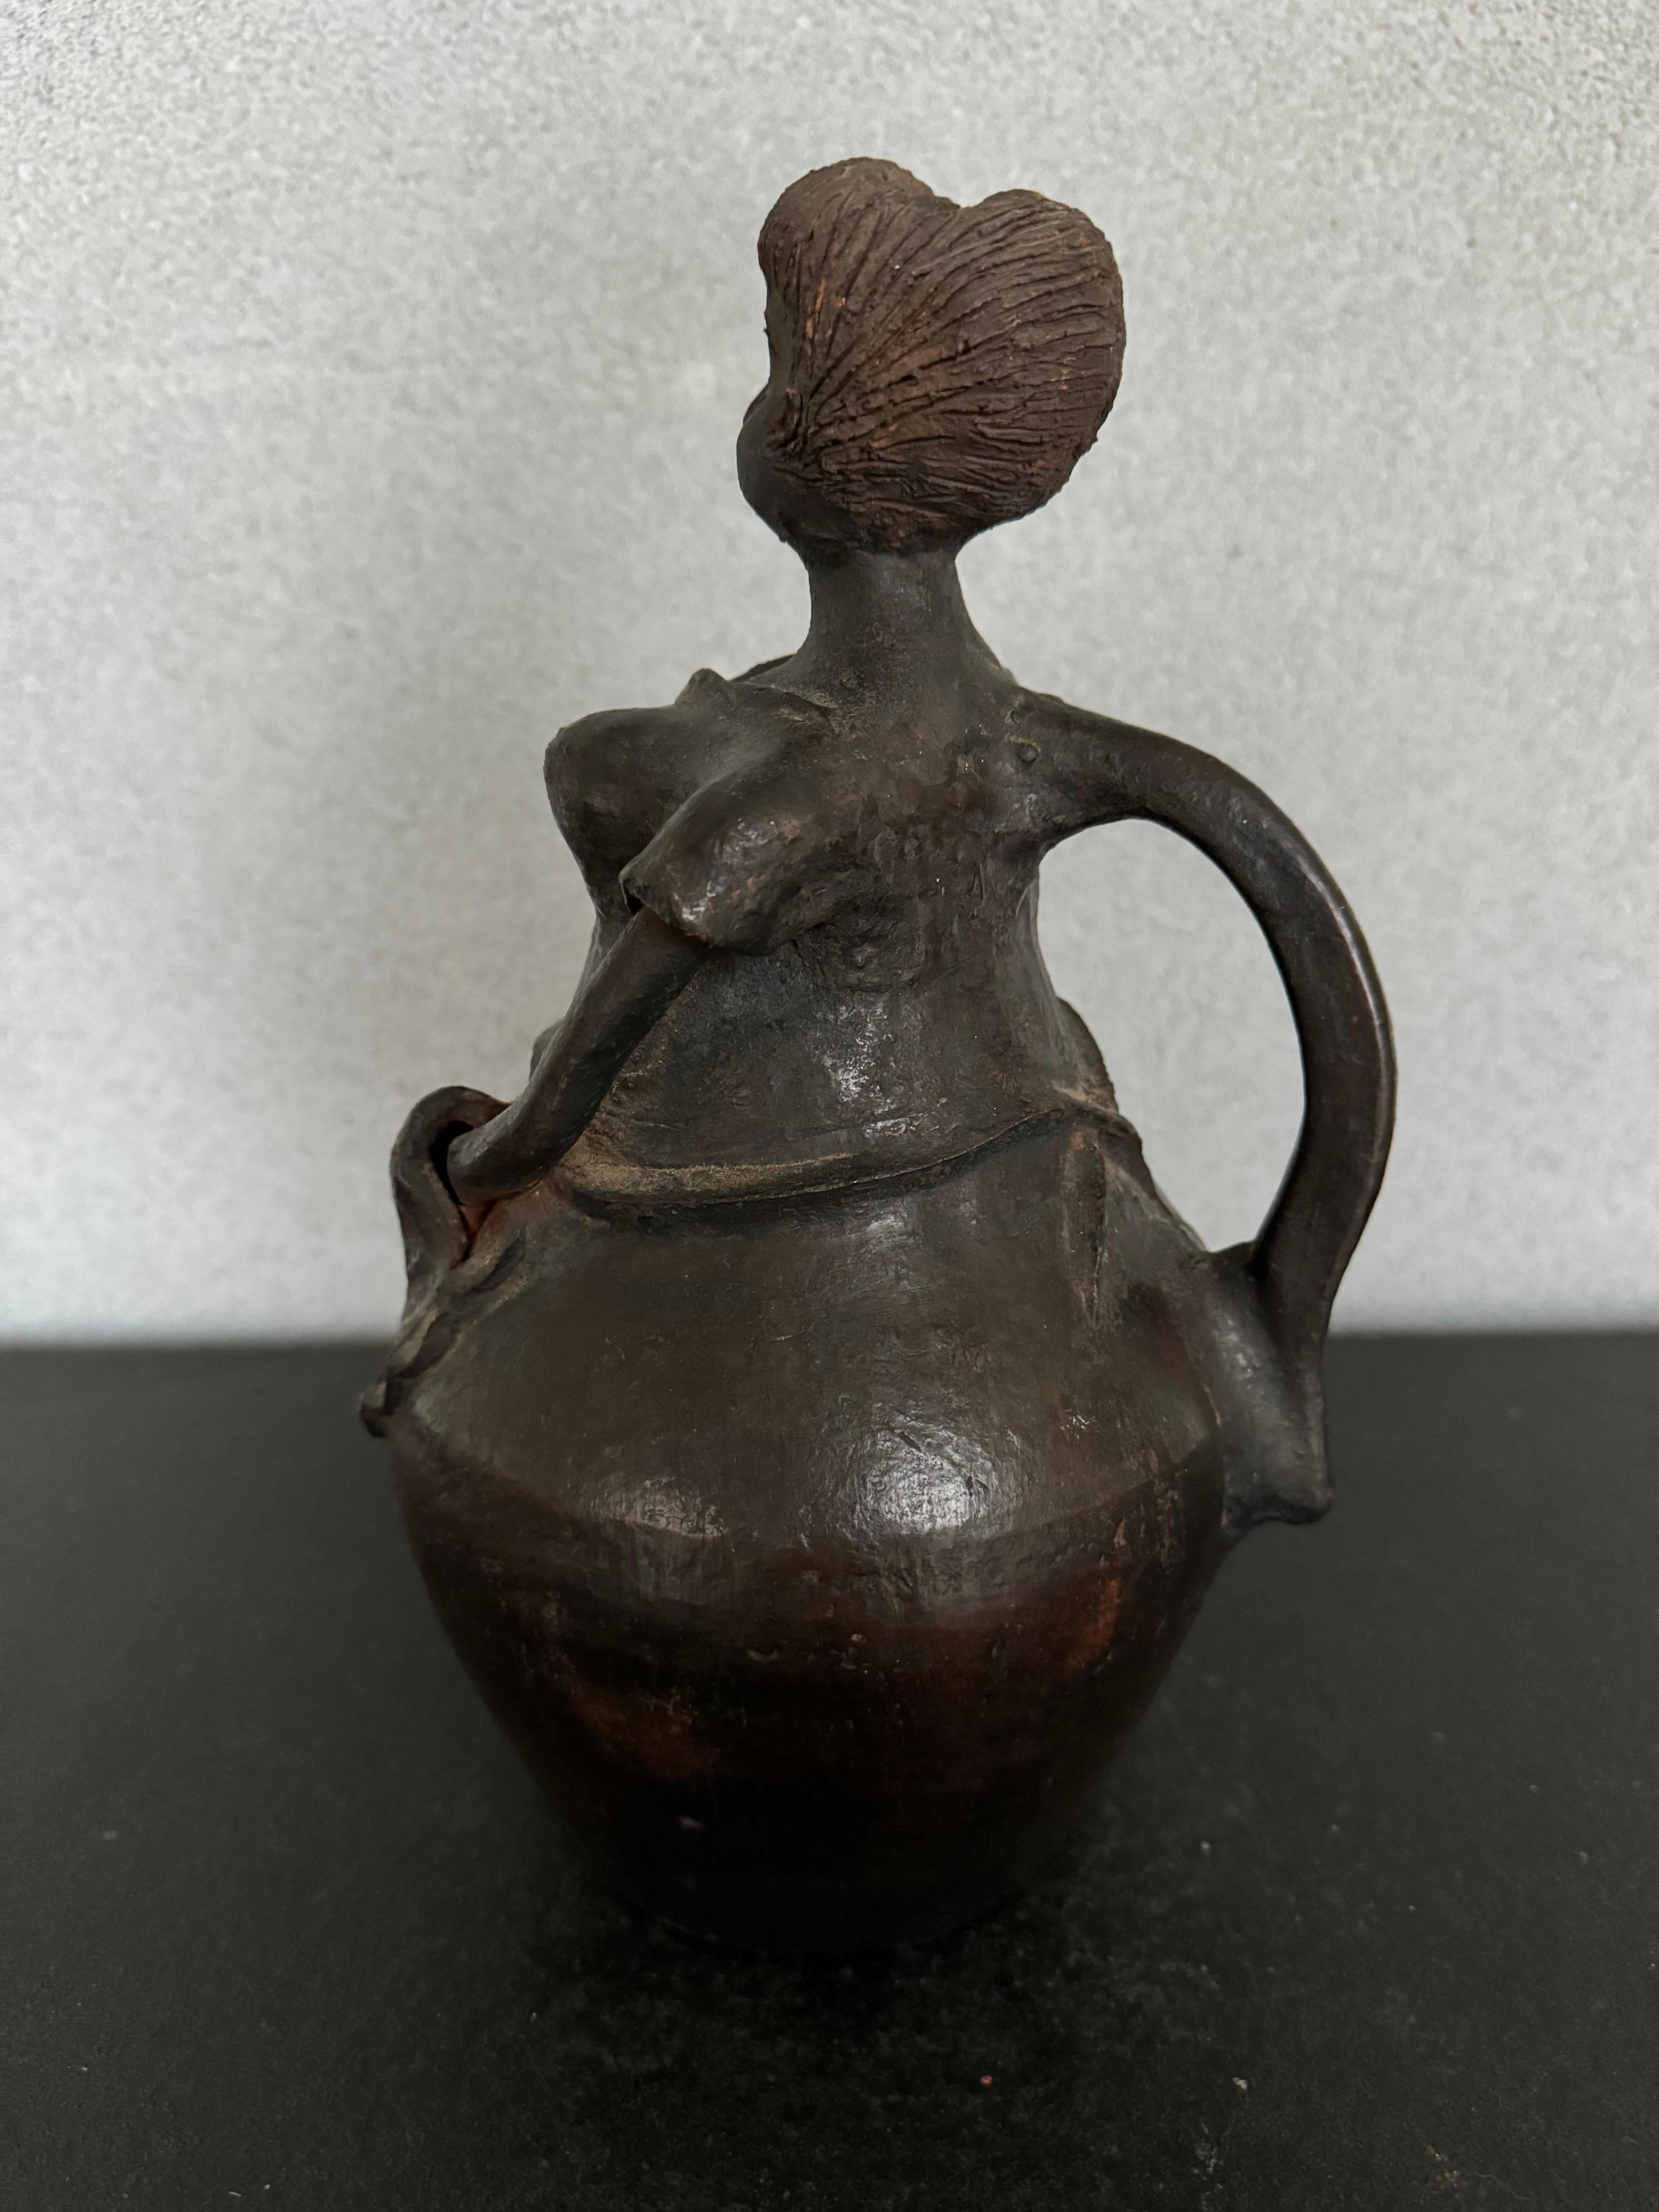 Rare and unique Mid-Century pottery piece, shape as a women with an apron, has a handle like a pitcher but it’s not an actual pitcher, also has a hole at top of the head but there is not opening for liquid to pour 
Acquired at and estate sale and